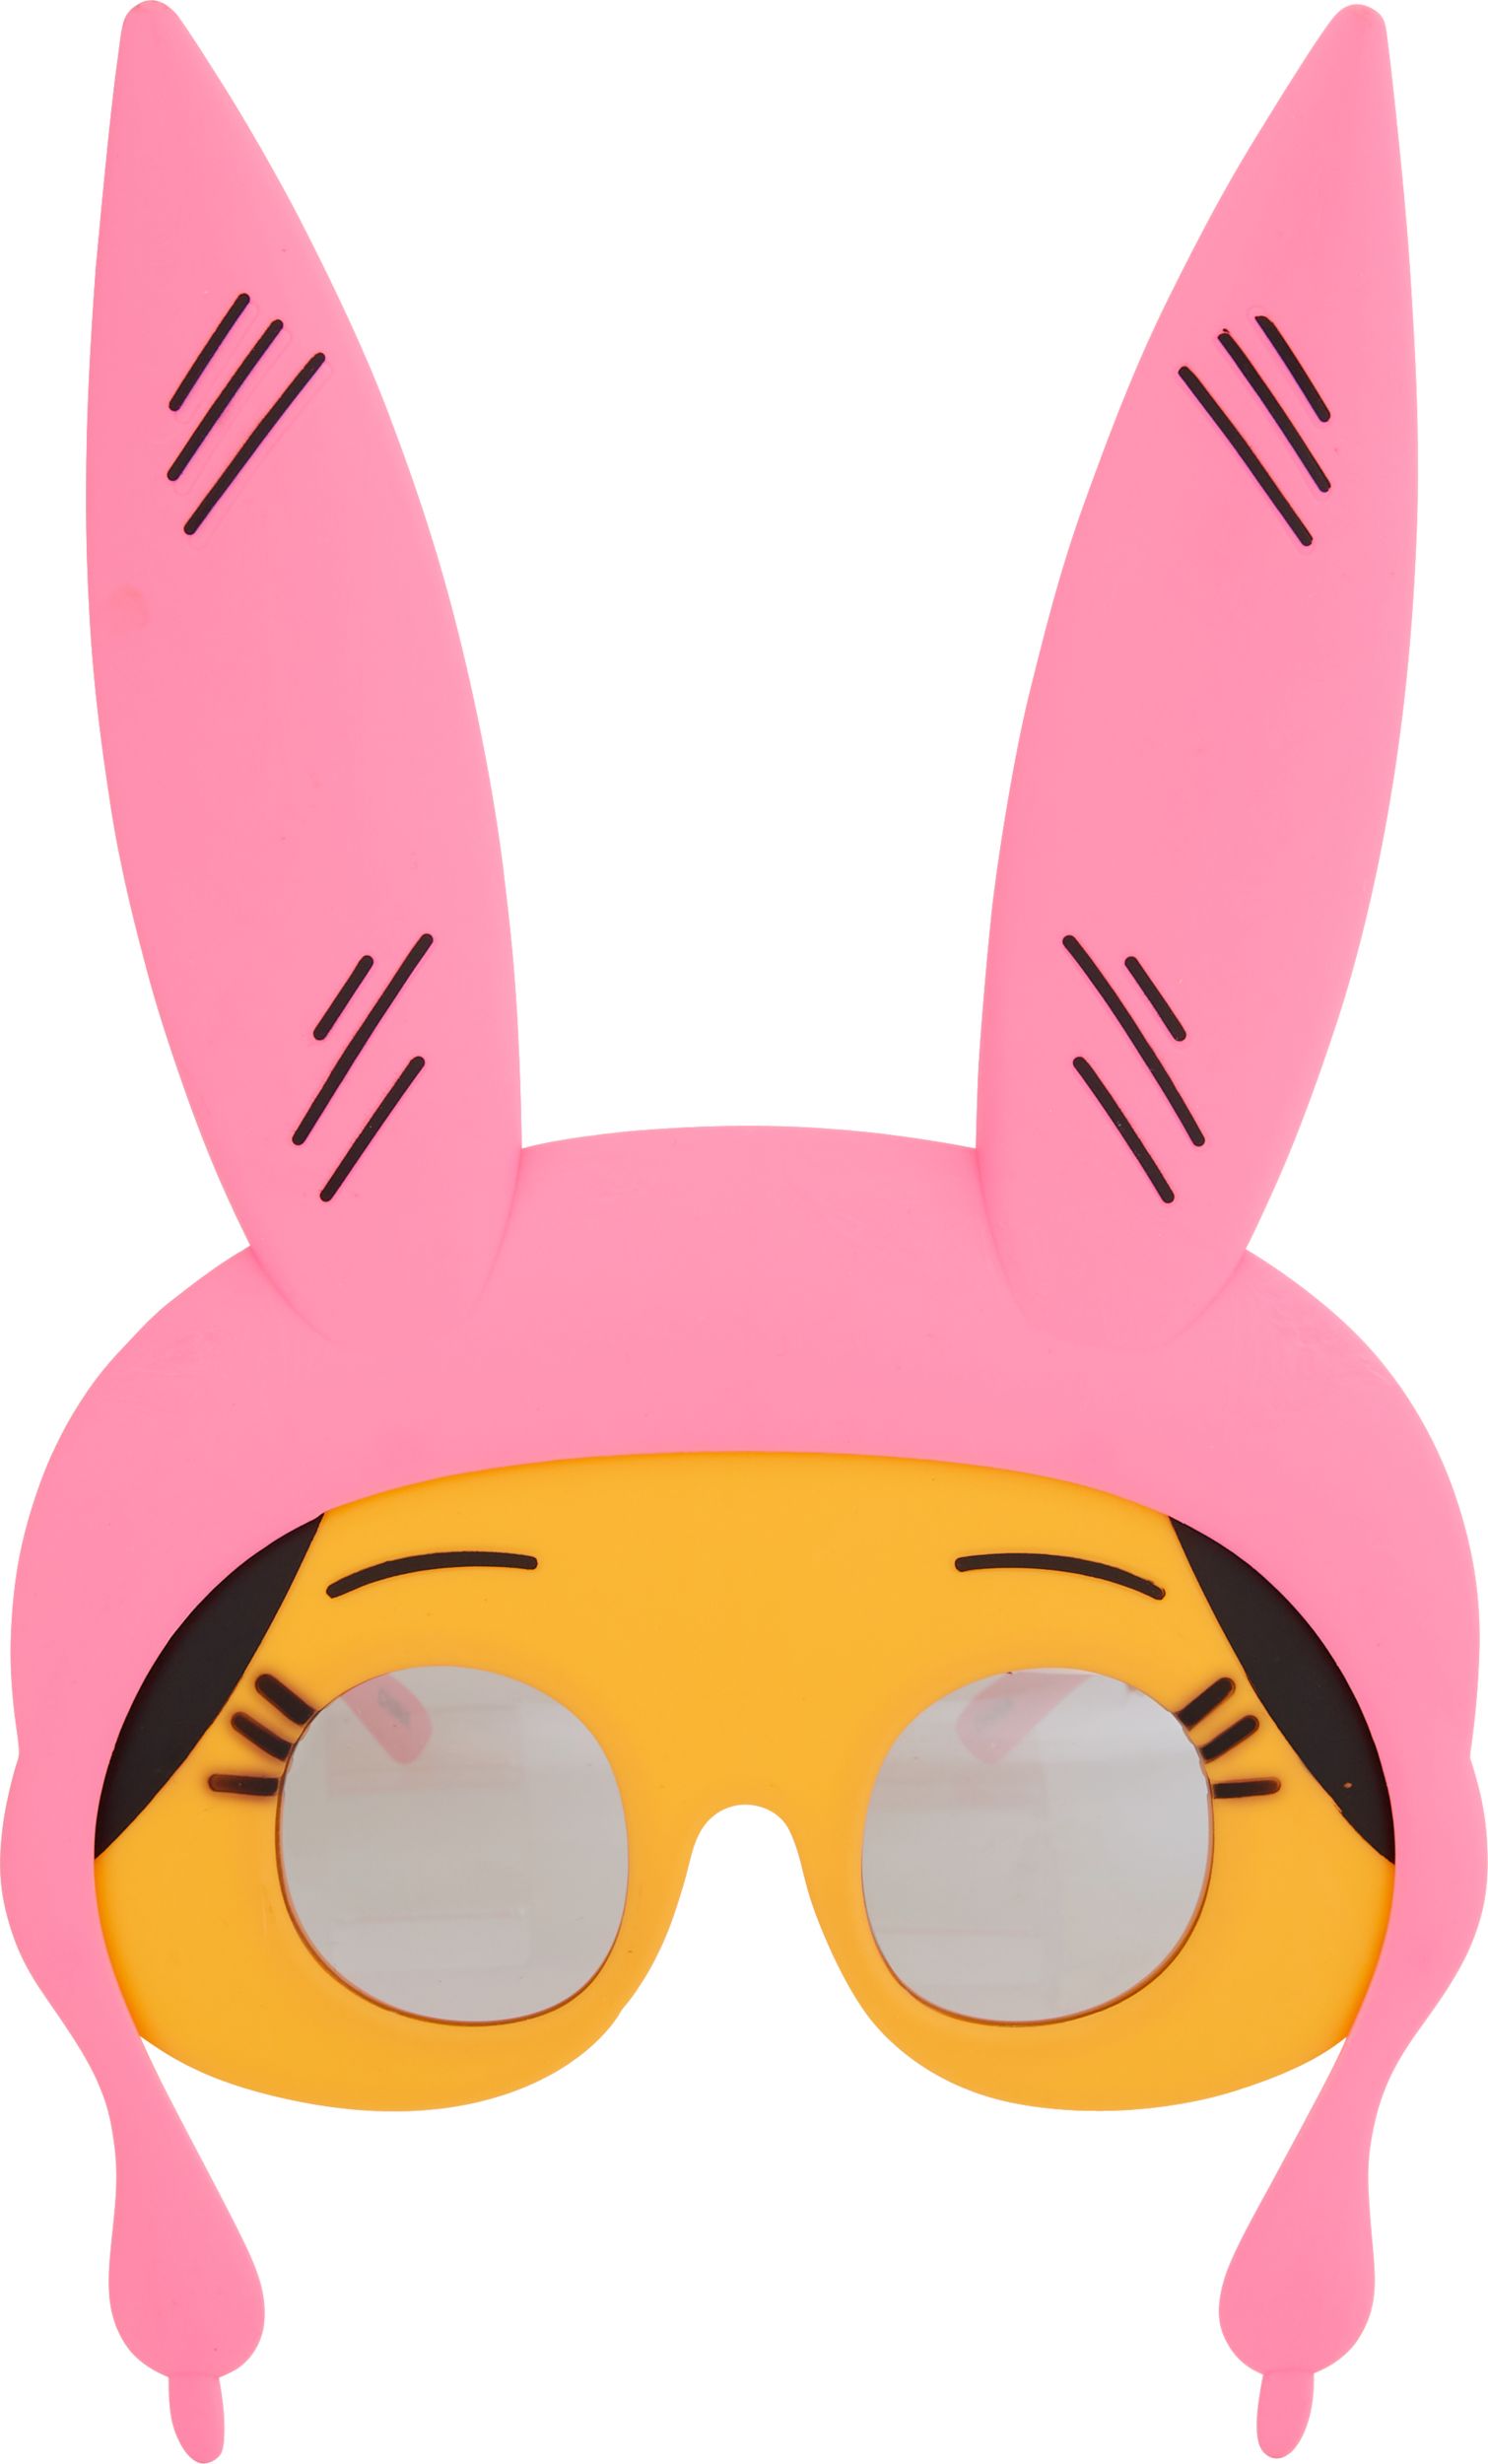 Louise Belcher Bags for Sale